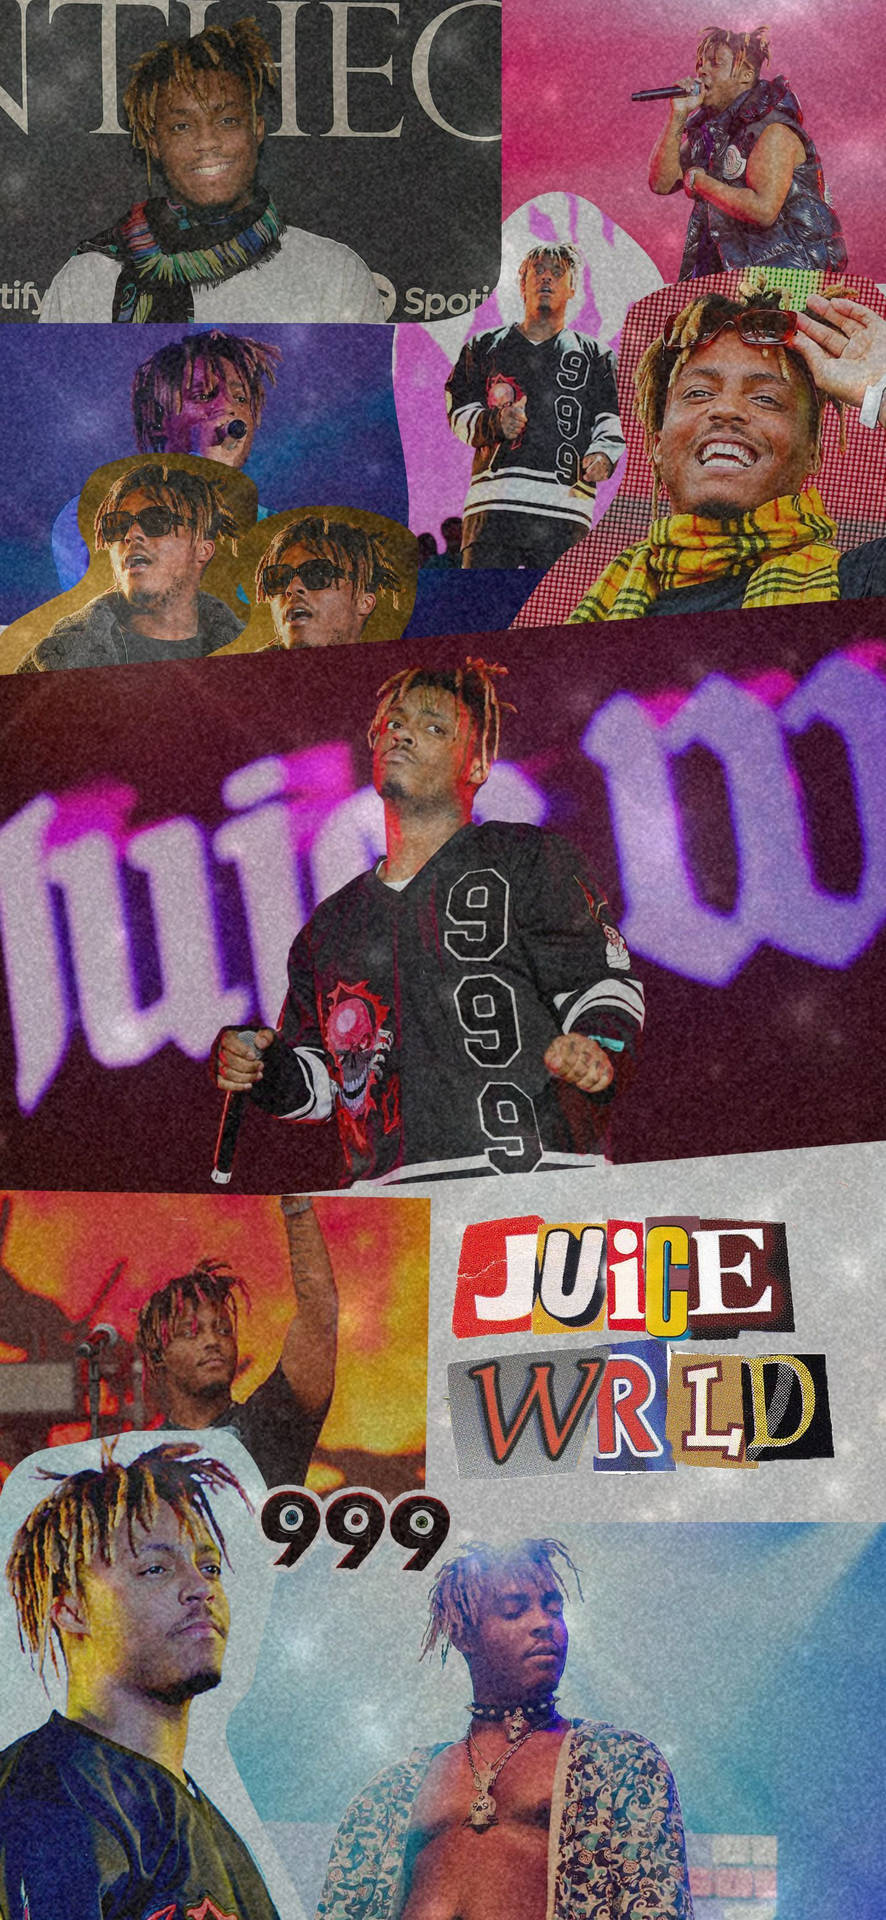 "Inspired by the music and style of Juice Wrld" Wallpaper